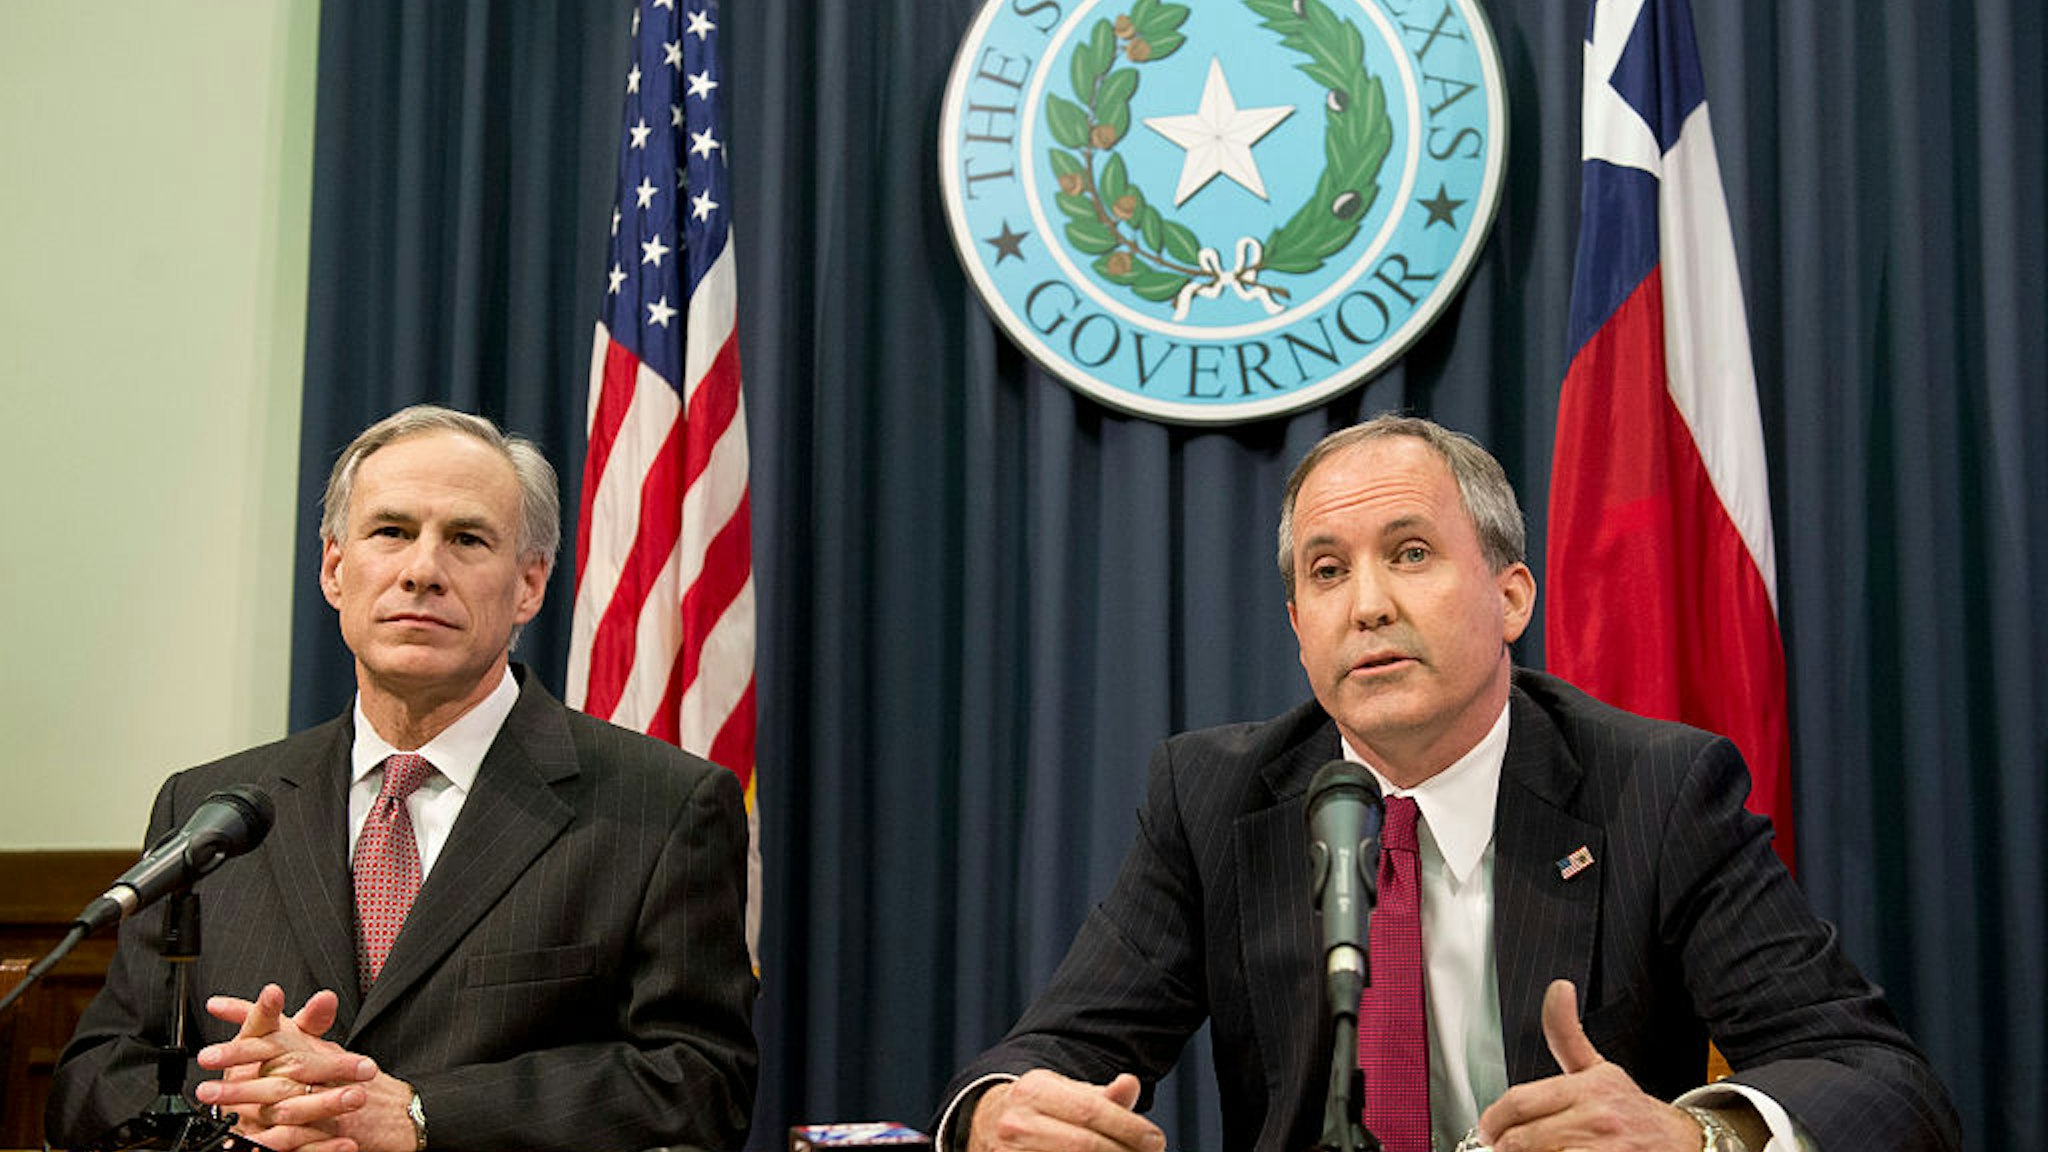 Texas Gov. Greg Abbott, l, and Attorney General Ken Paxton hold a press conference to address a Texas federal court's decision on the immigration lawsuit filed by 26 states challenging President Obama. Paxton was indicted Monday on three counts of securities fraud unrelated to his official duties.